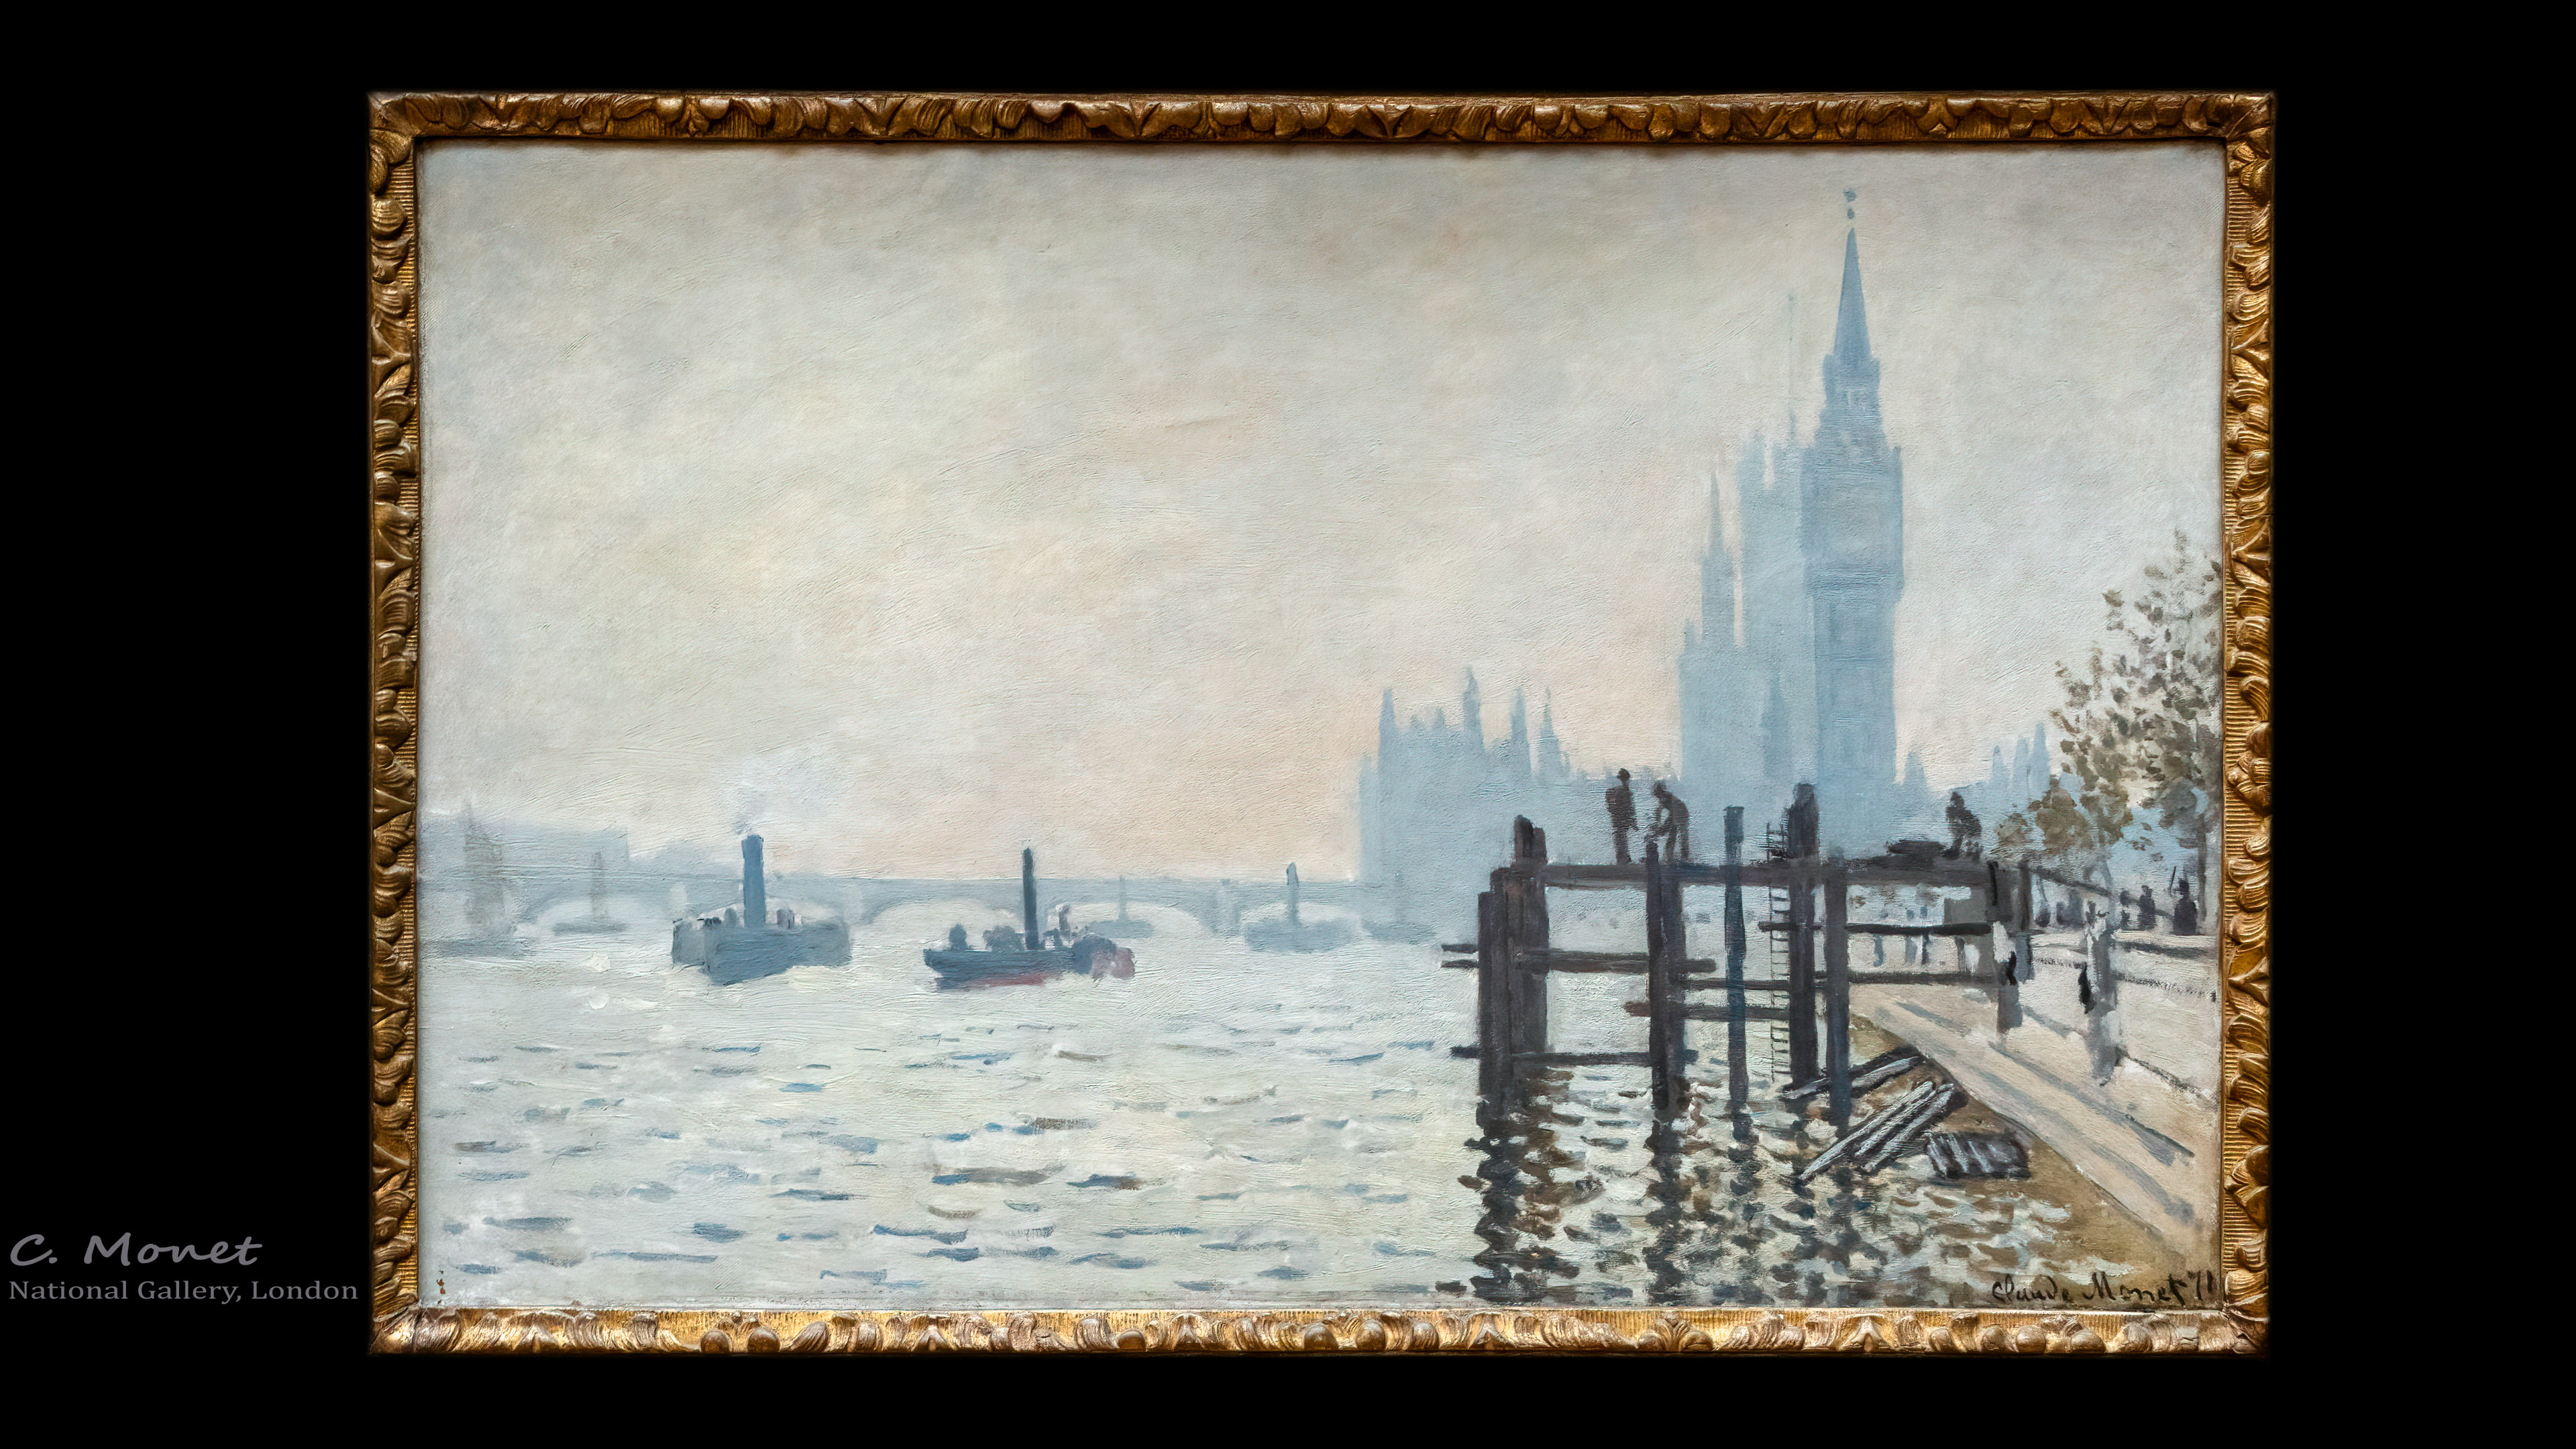 Experience the grandeur of London landmarks through Monet's eyes with our 4K wallpaper.